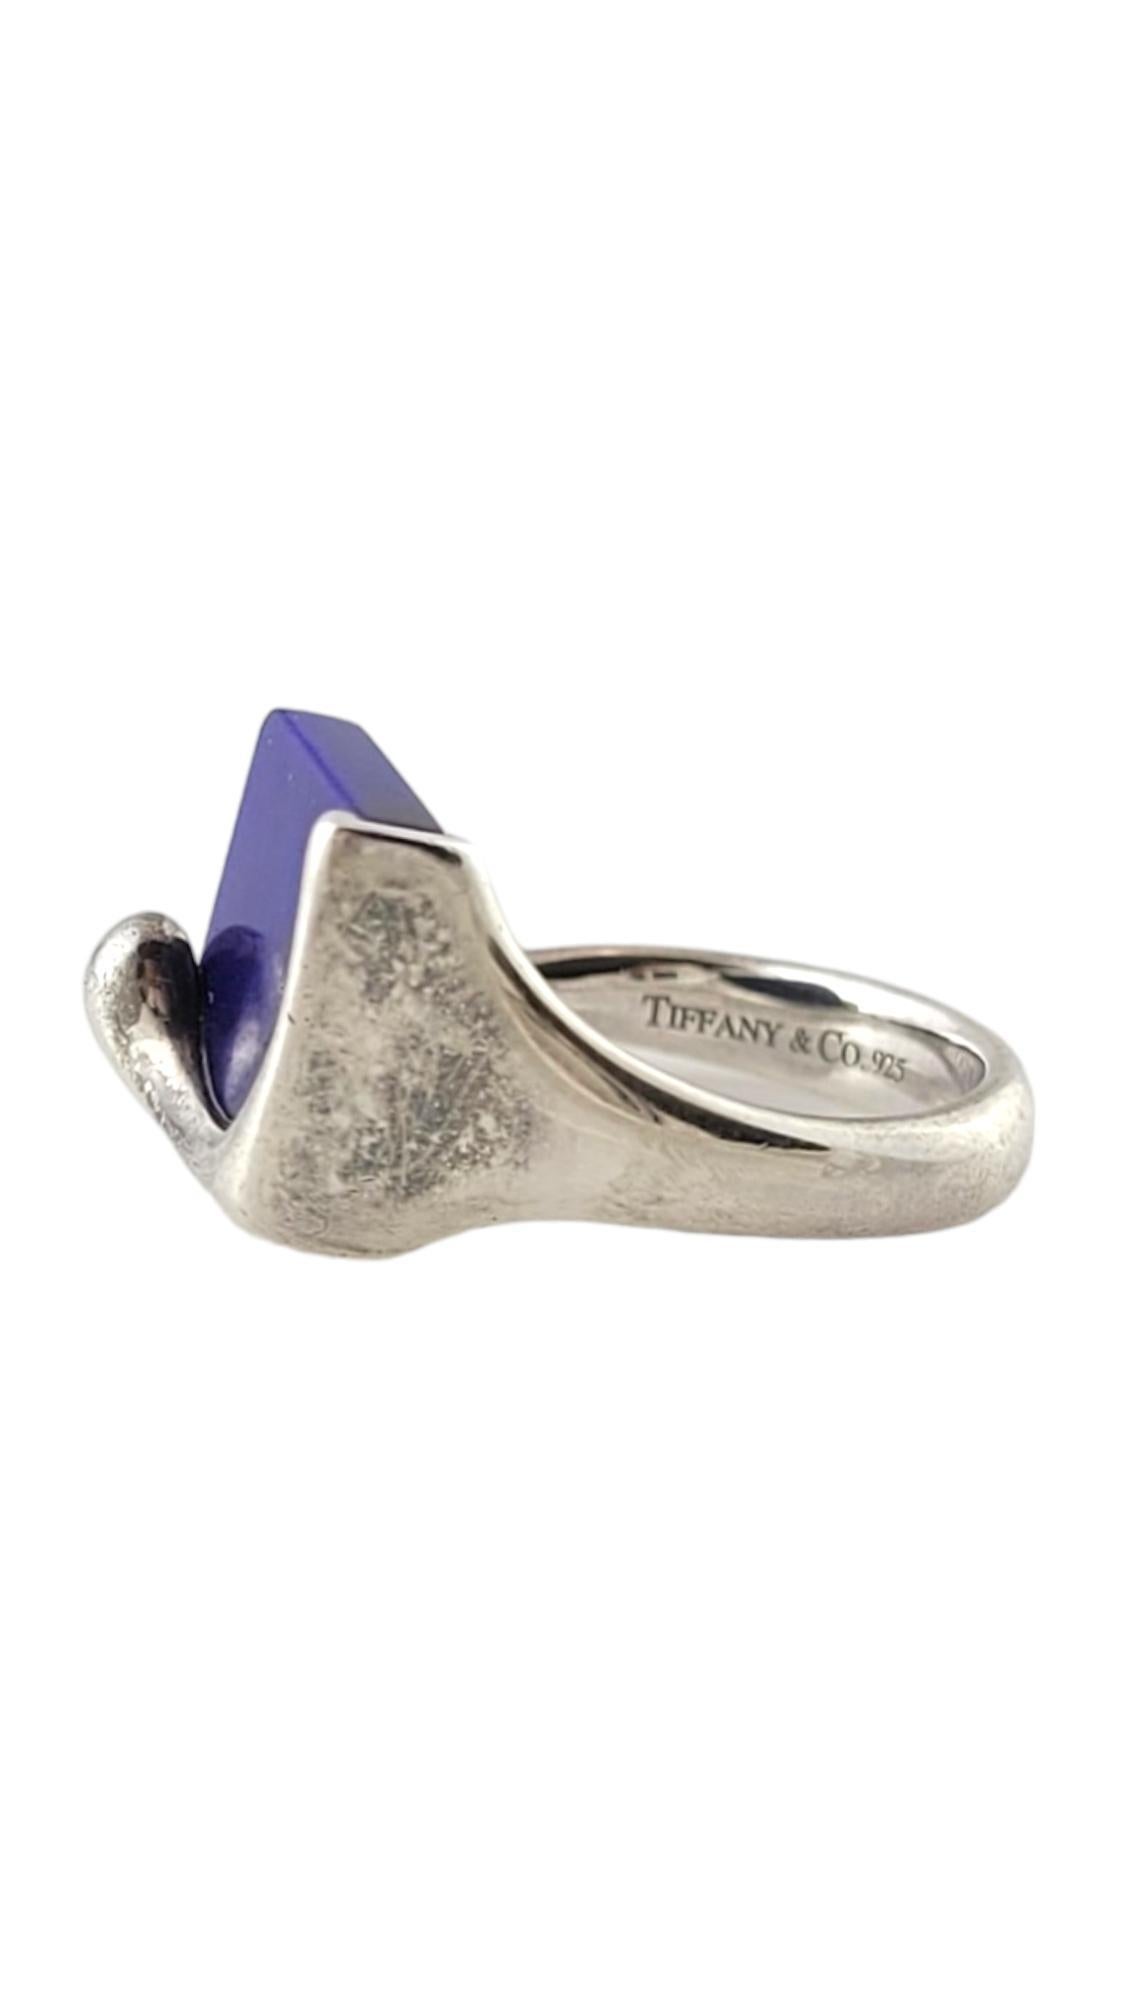 Vintage Tiffany & Co. Sterling Silver Peretti Blue Lapis Ring Size 5.75

This breathtaking sterling silver ring by designer Tiffany & Co. features a gorgeous blue lapis stone!

Ring size: 5.75
Shank: 3.52mm
Front: 11.25mm X 12.94mm X 4.27mm

Weight: